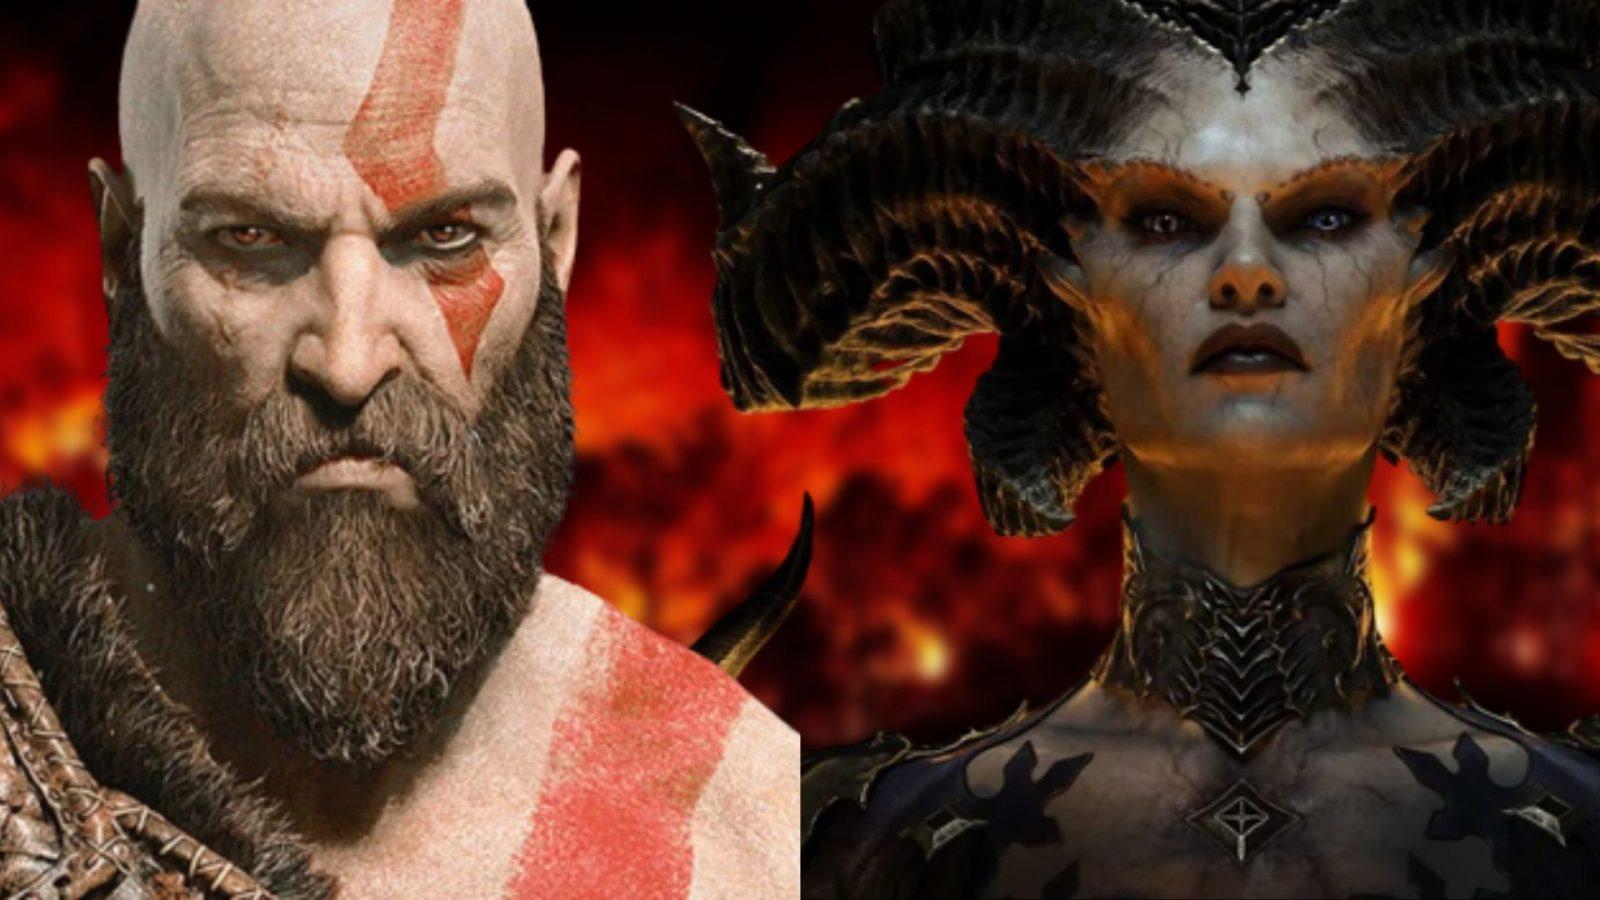 kratos from god of war and lilith from diablo 4